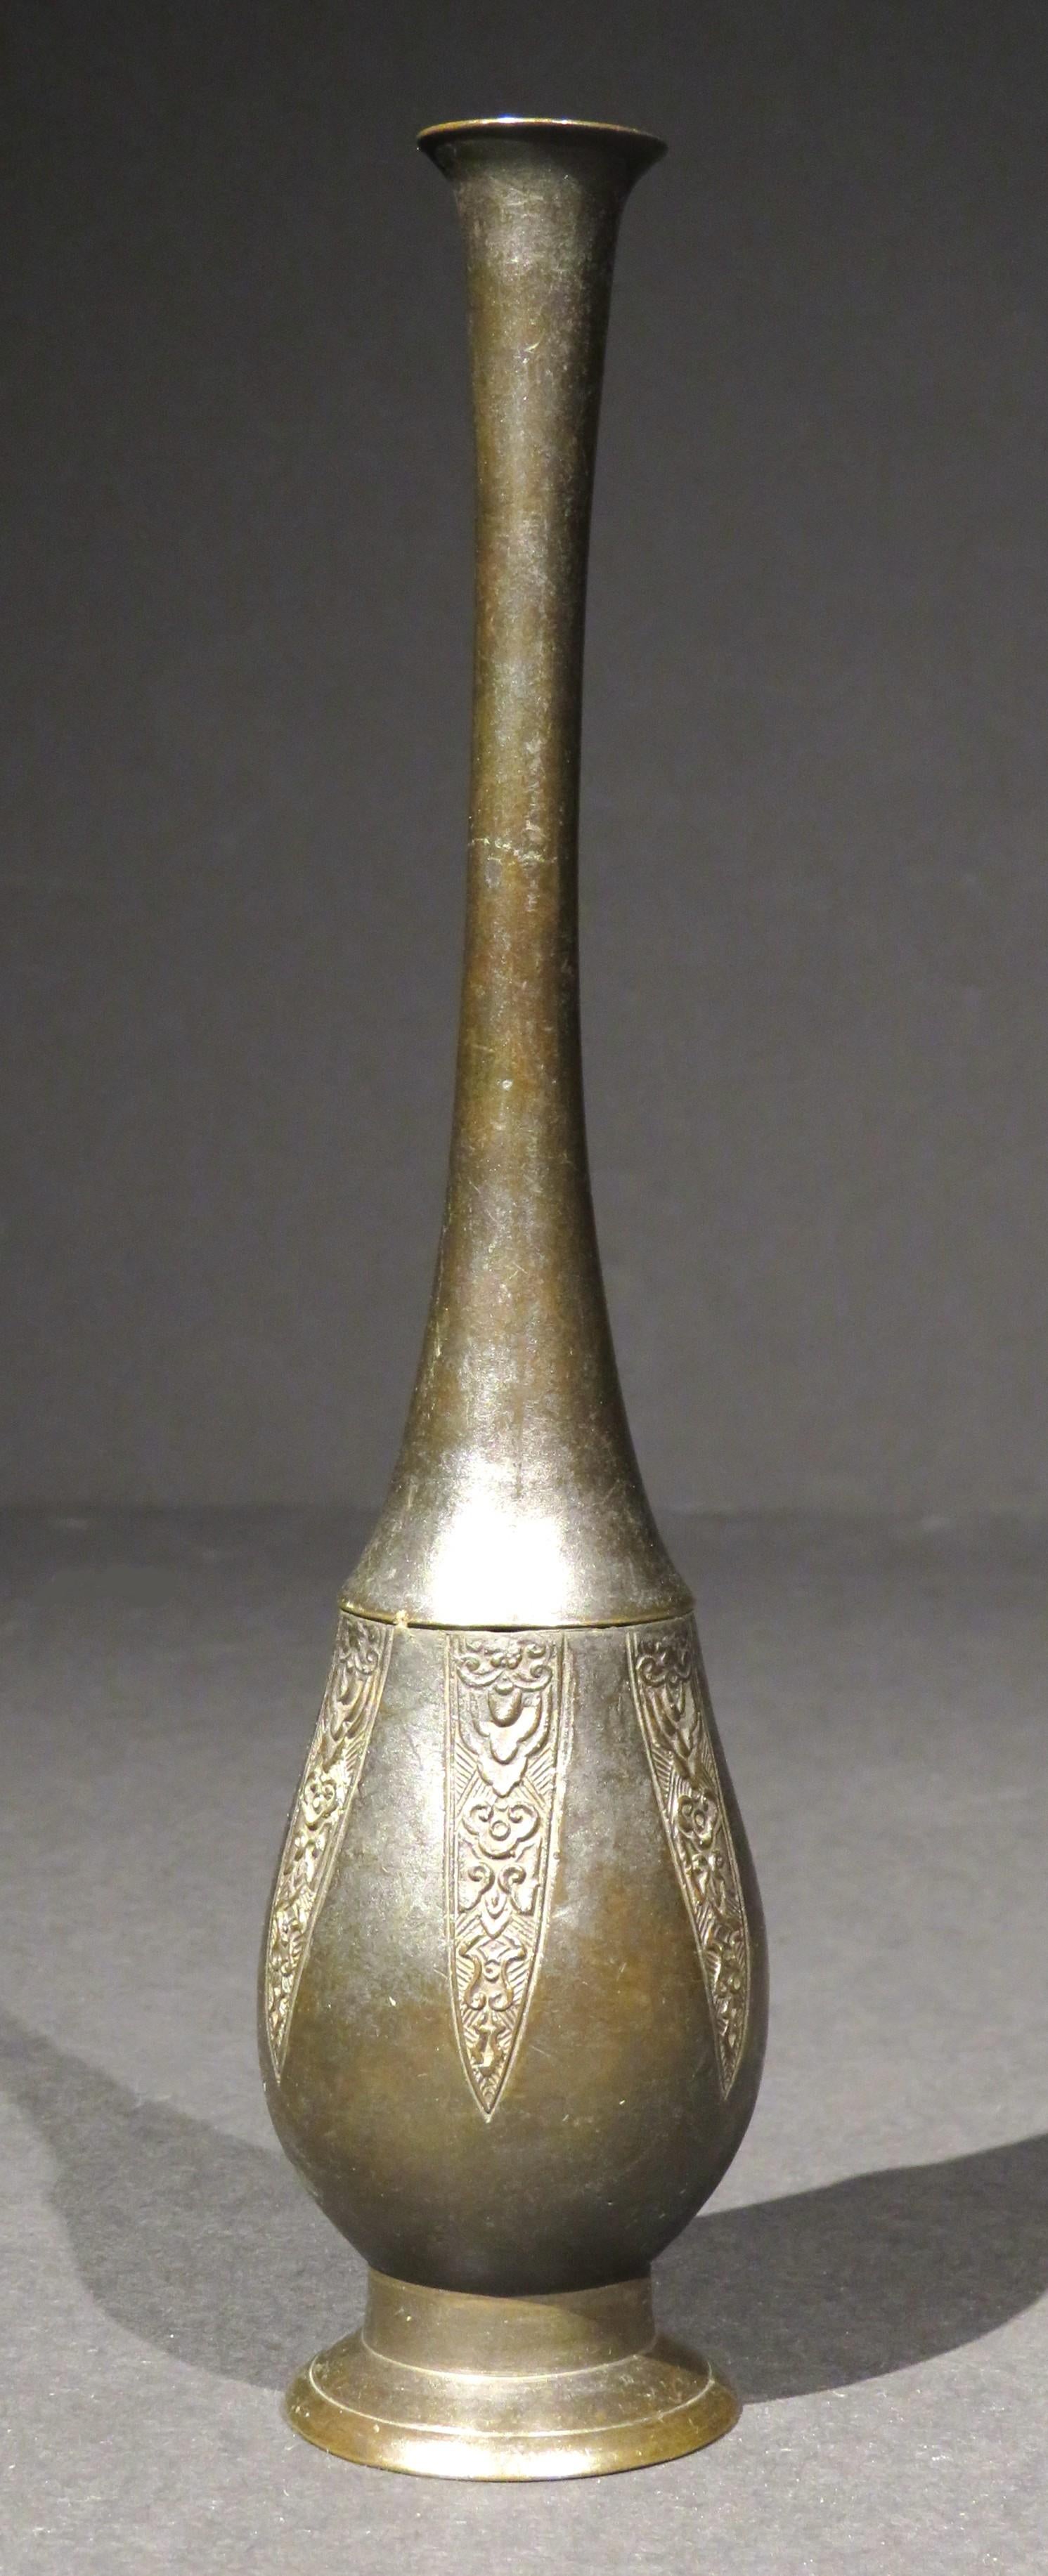 The bottle shaped body decorated with foliate & geometric motifs within petal shaped panels, rising to a slender tapering neck to a flaring rim, raised overall upon a circular foot.